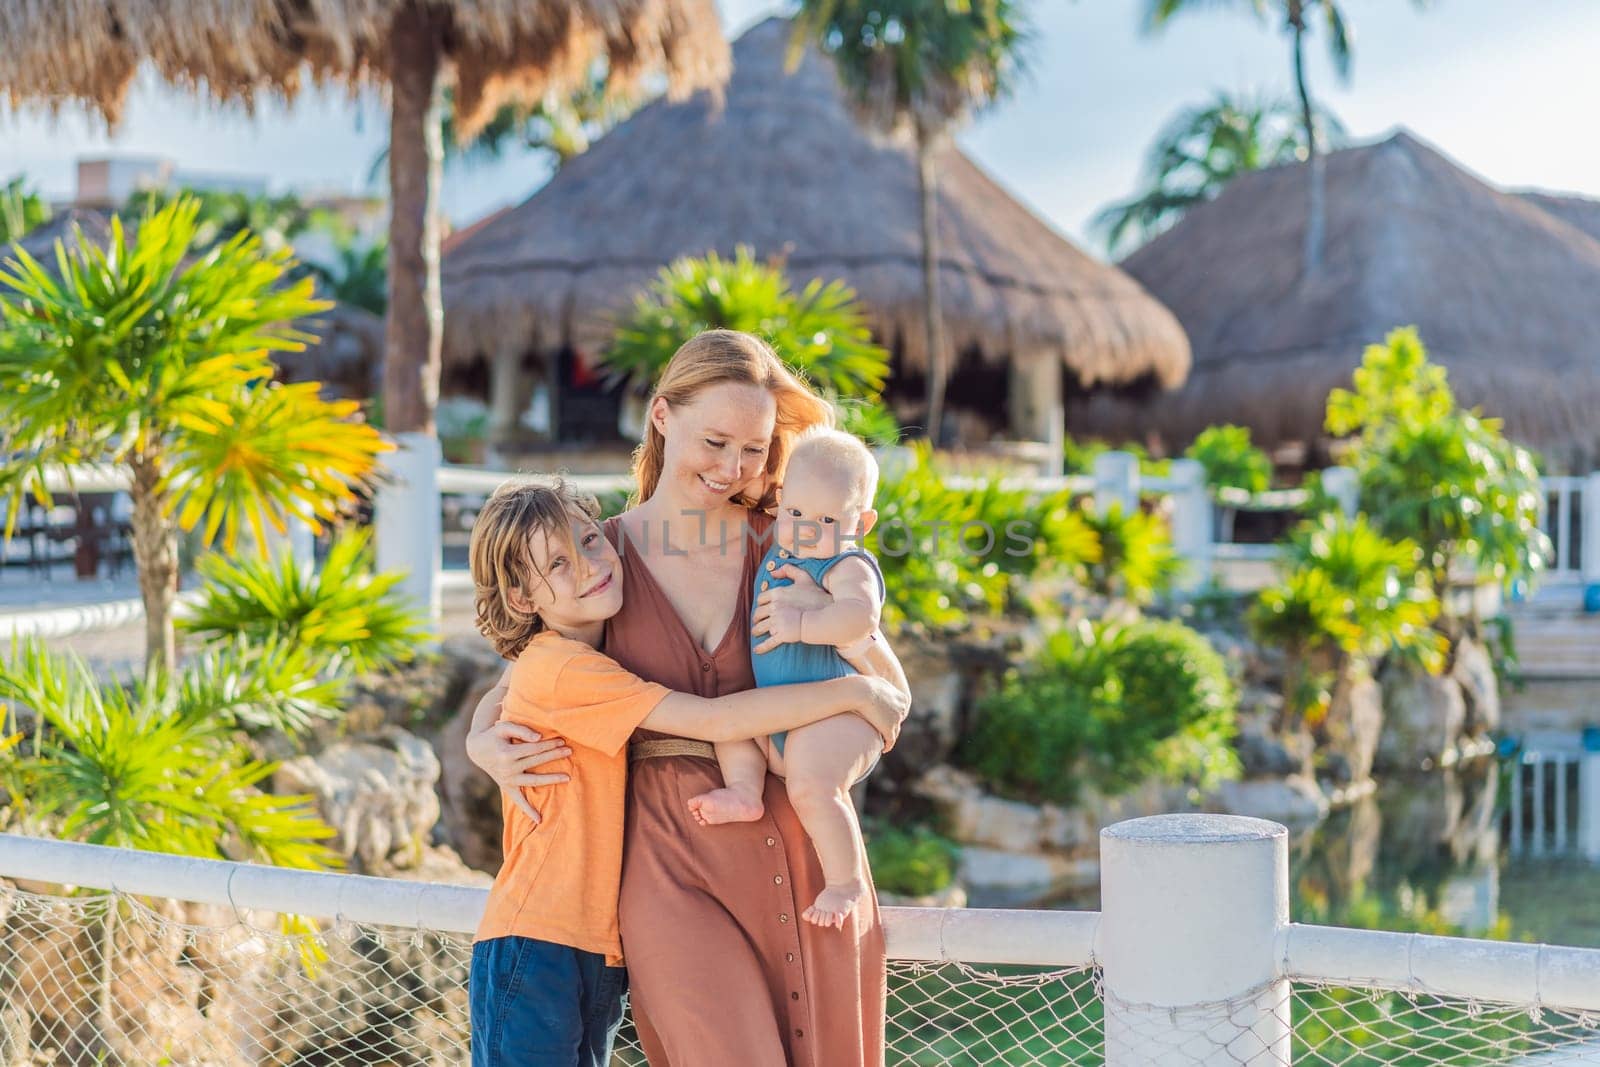 In a tropical paradise, a mom lovingly embraces her baby and 10-year-old son amid lush palm trees and thatched roofs, creating heartwarming family memories by galitskaya